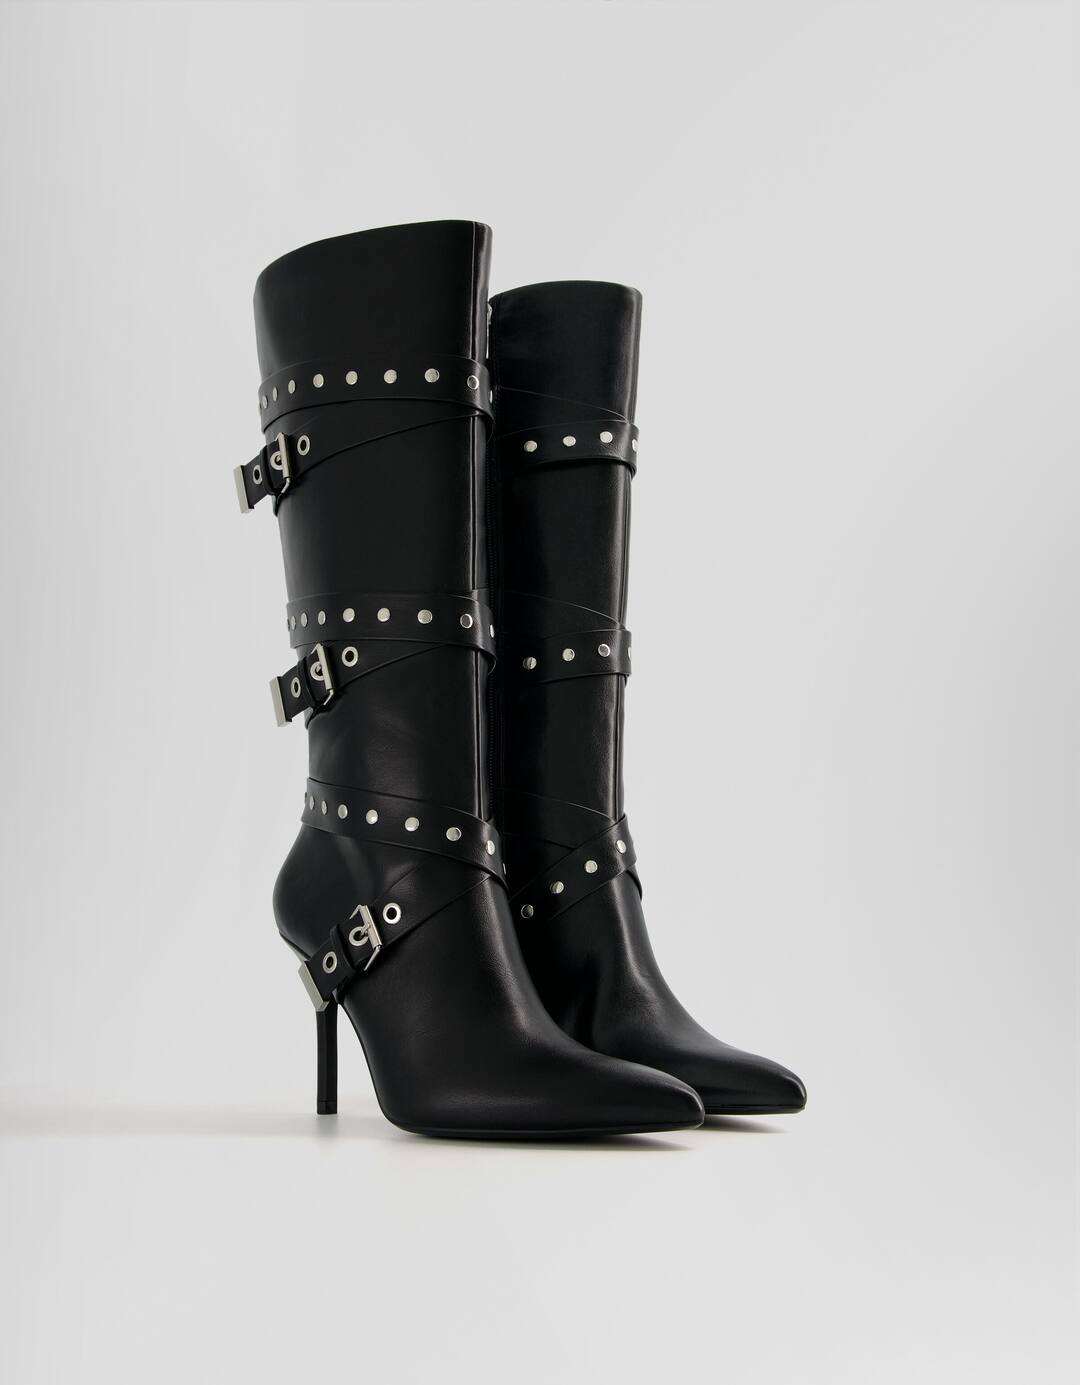 High-heel boots with studded and buckled straps